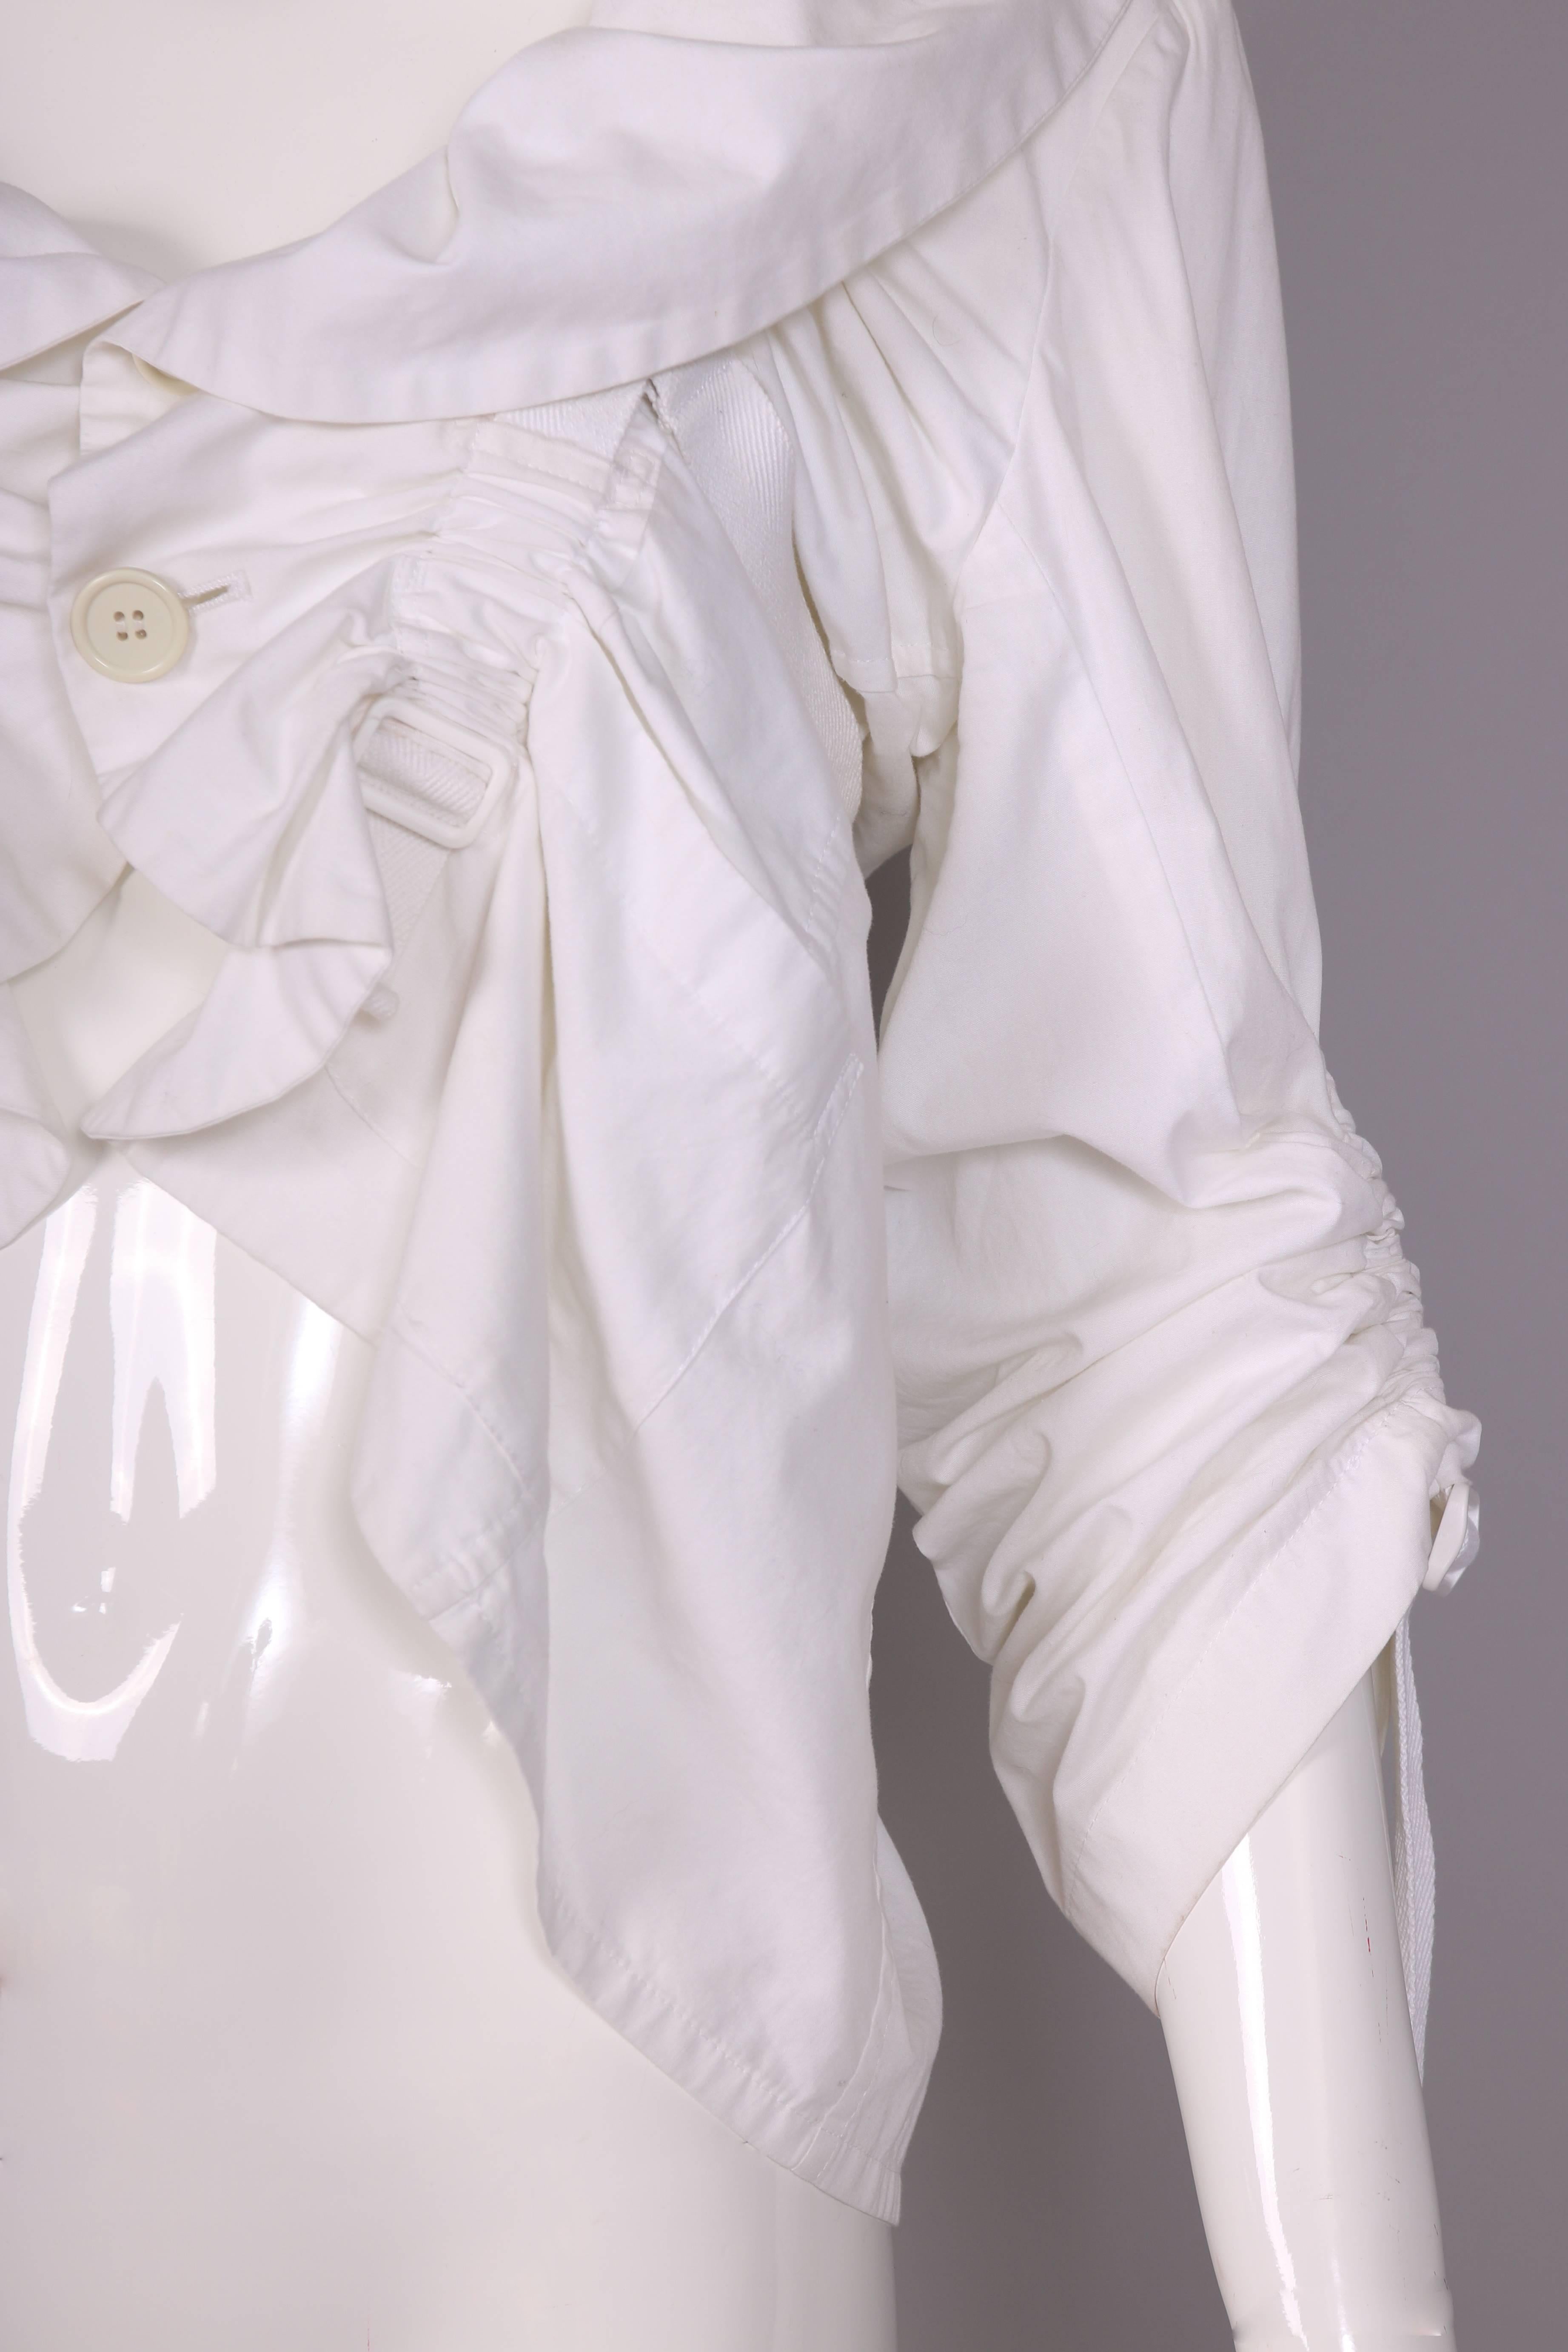 2002 Junya Watanabe for Comme Des Garcons Ruched White Cotton Ruffle Top  2